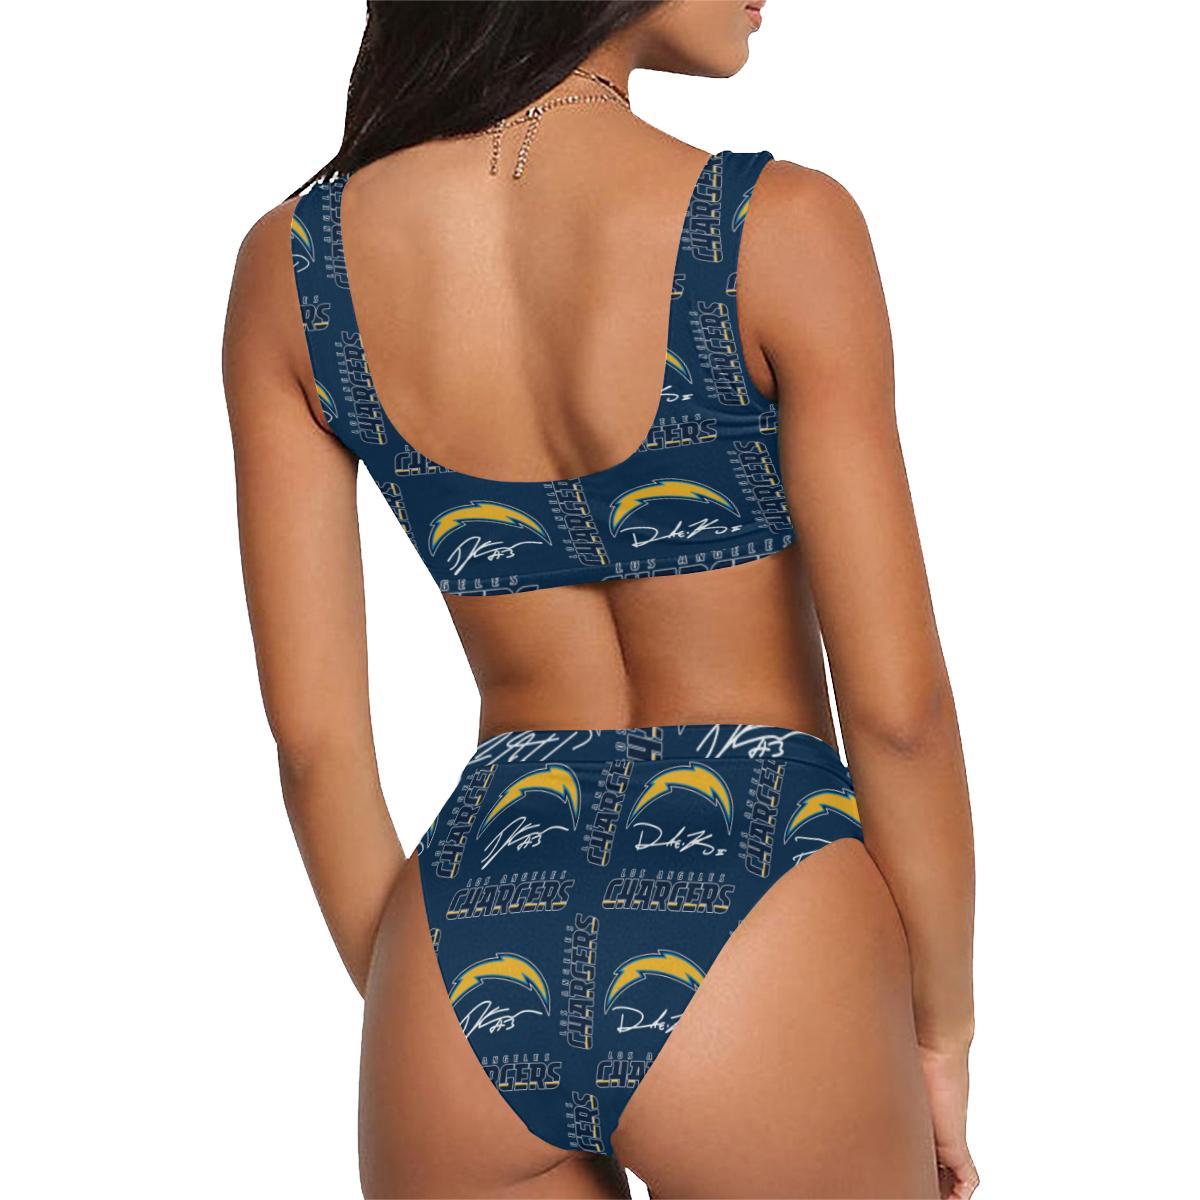 Los Angeles Chargers Sport Top & High-Waisted Bikini Swimsuit